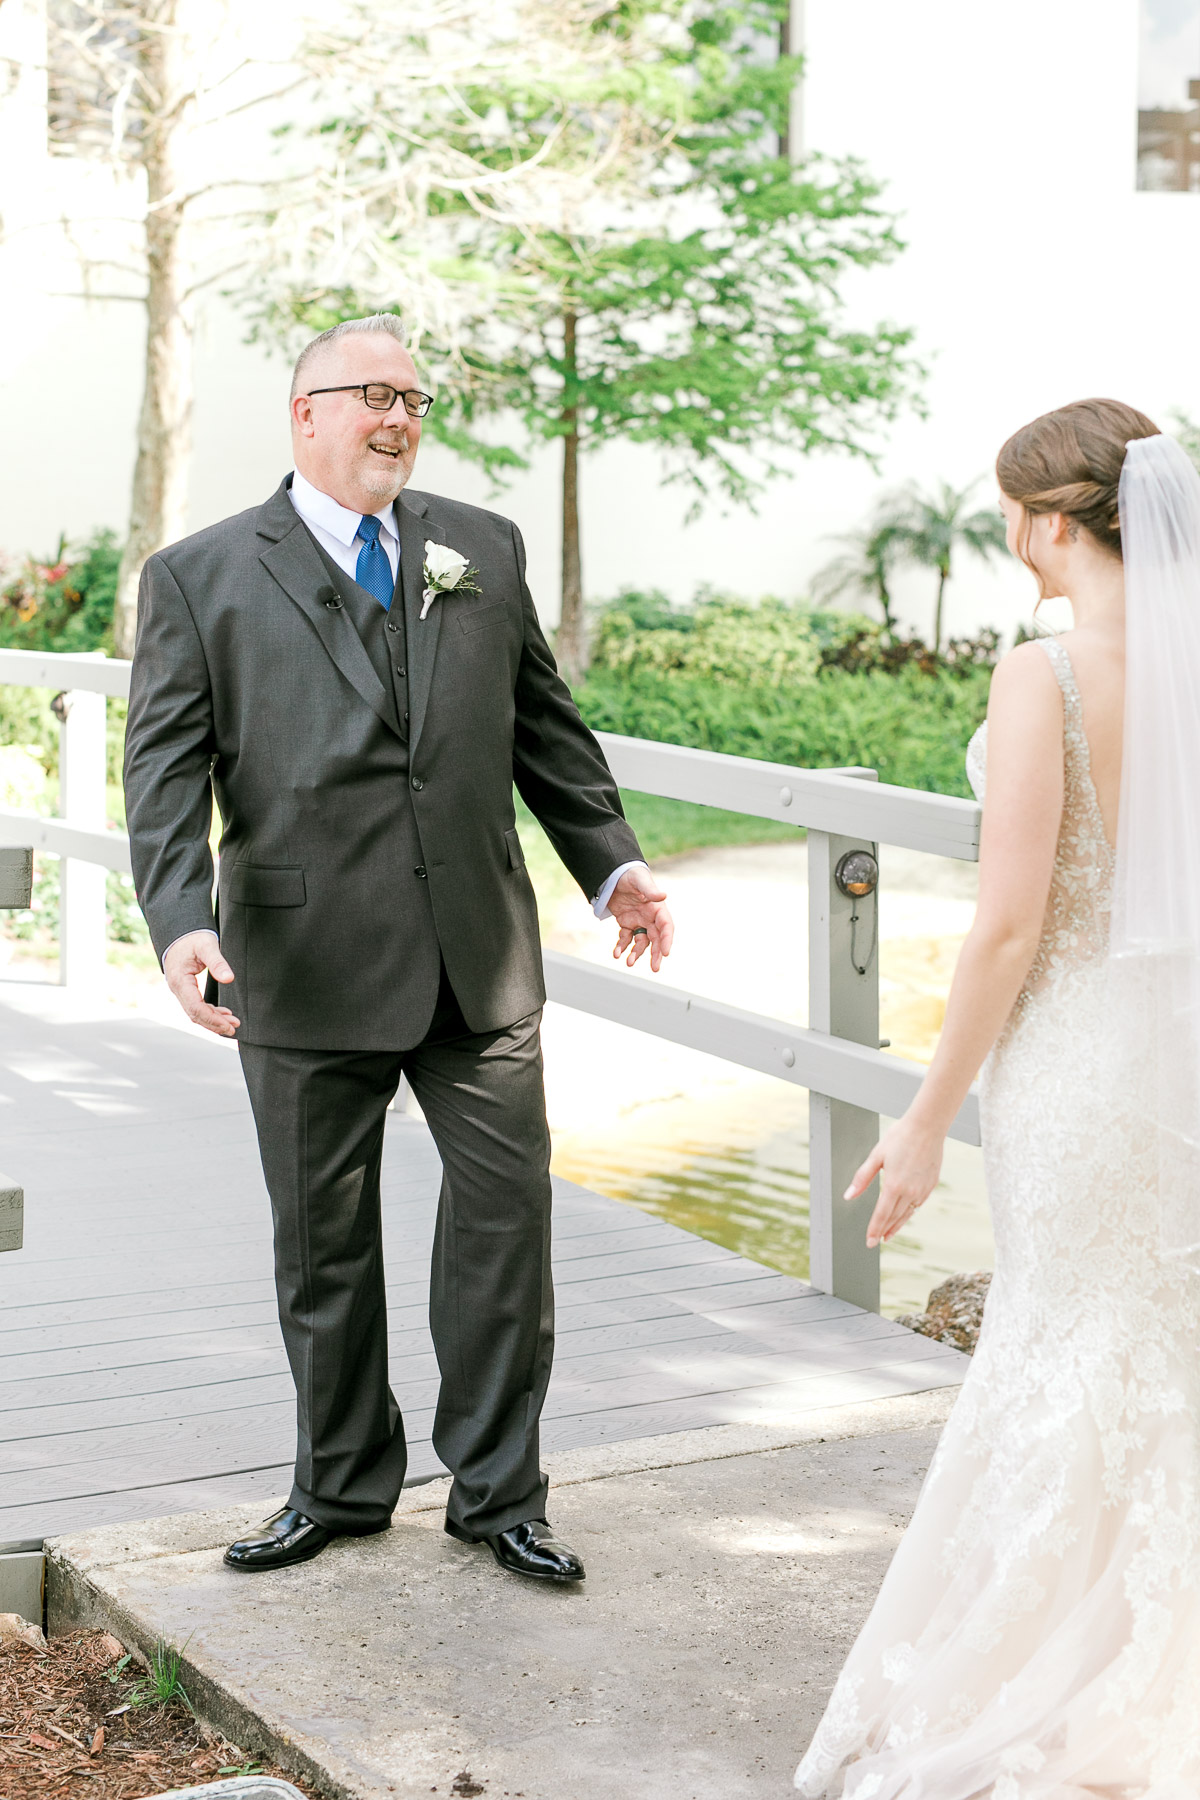 Bride's dad seeing her for the first time on her wedding day